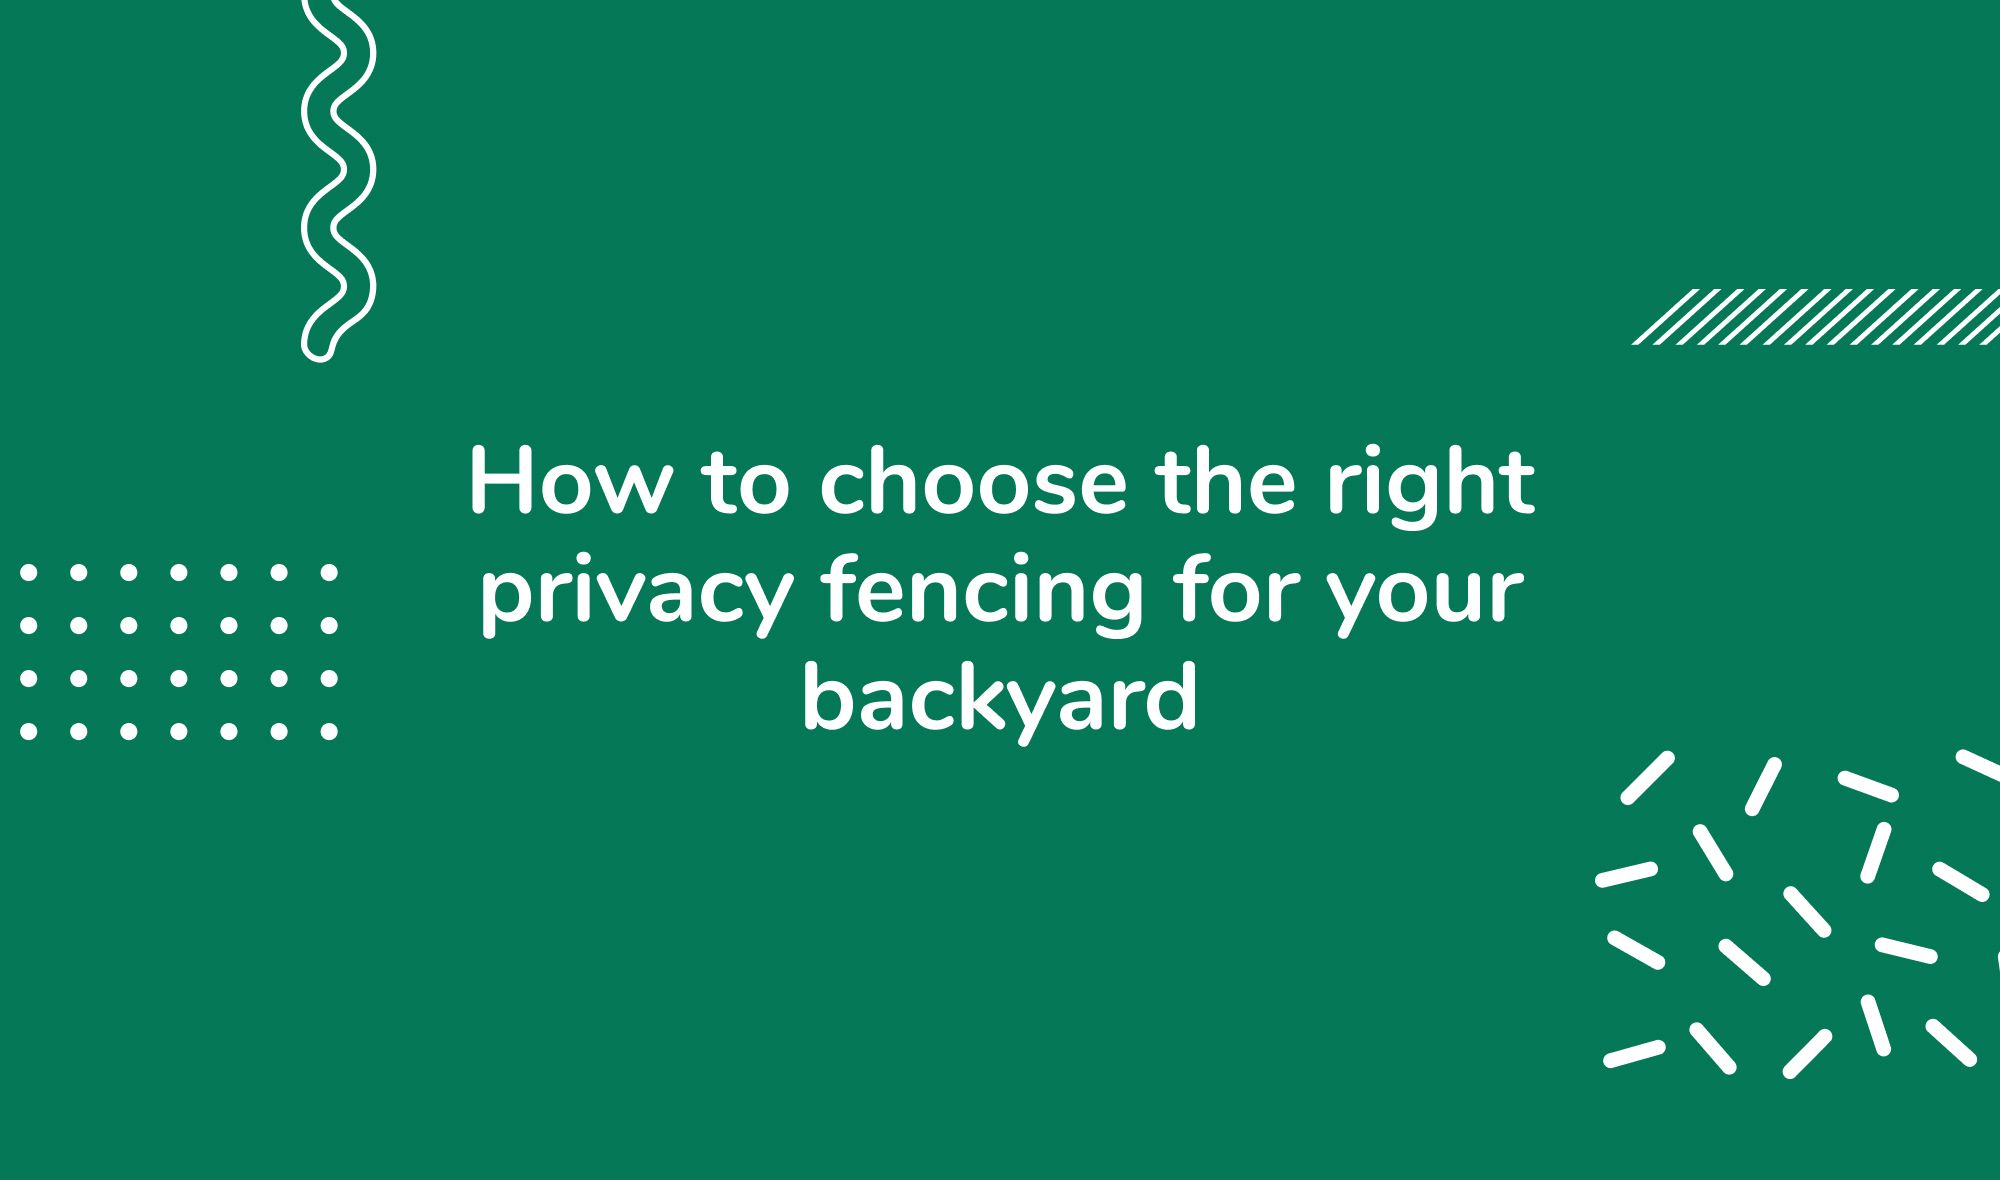 How to choose the right privacy fencing for your backyard